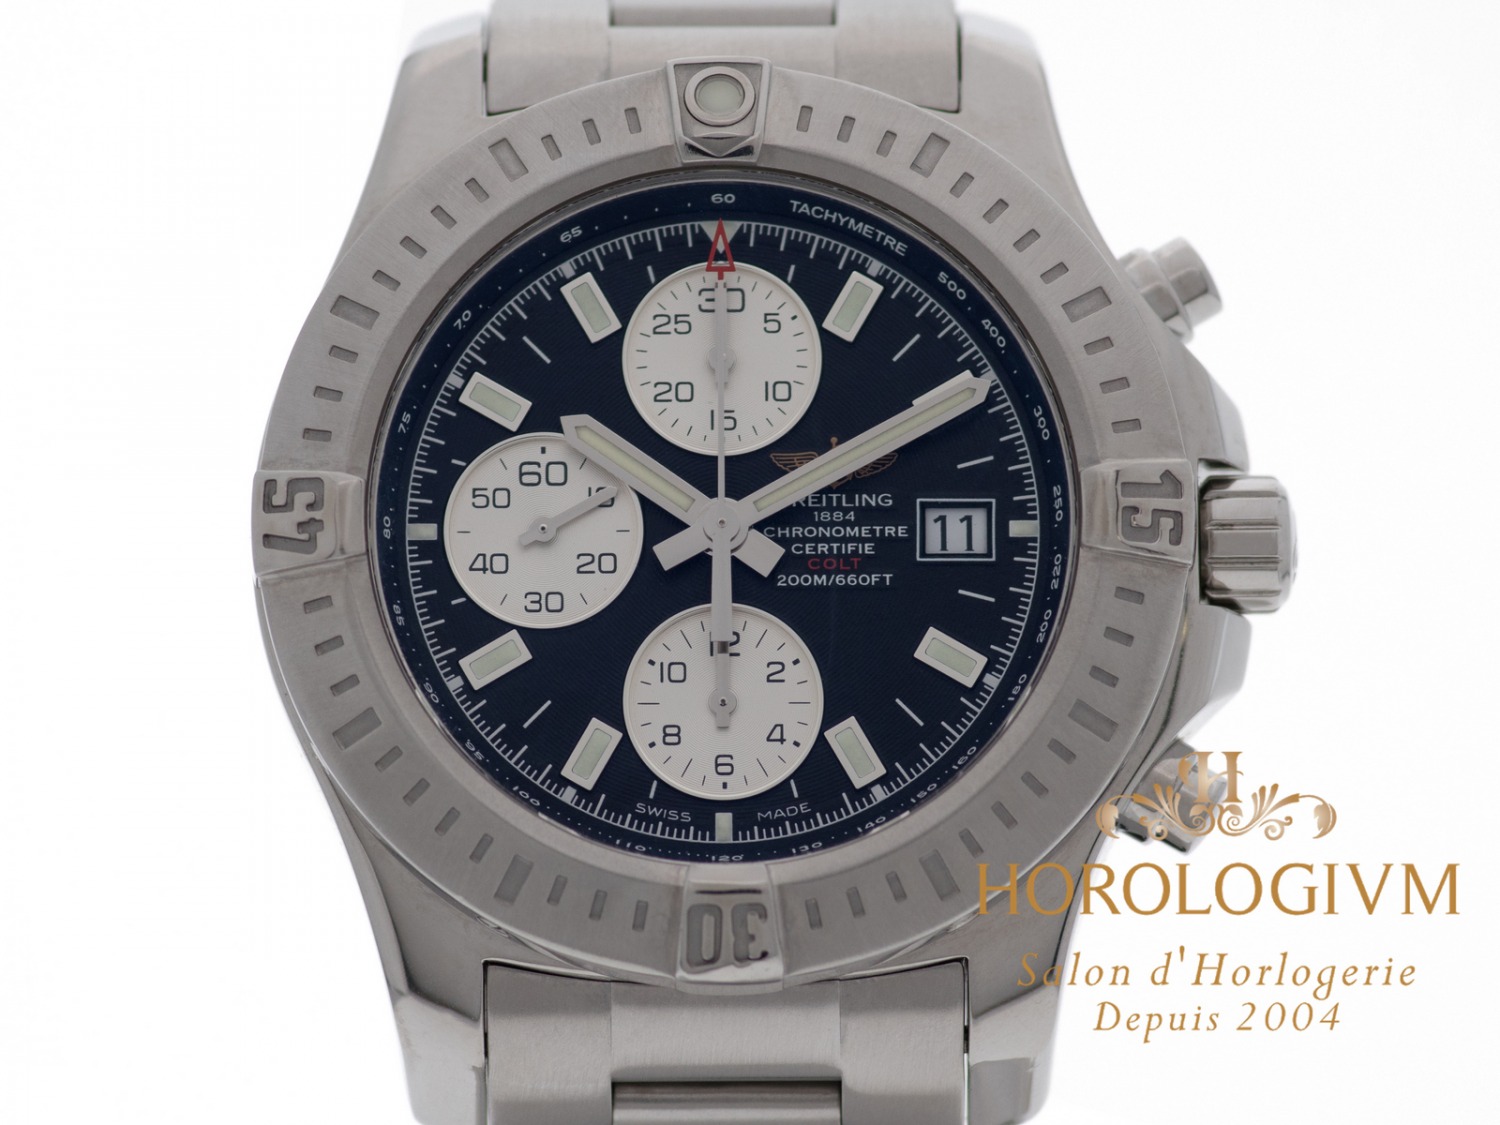 Breitling Colt Chronograph REF. A13388 watch, silver